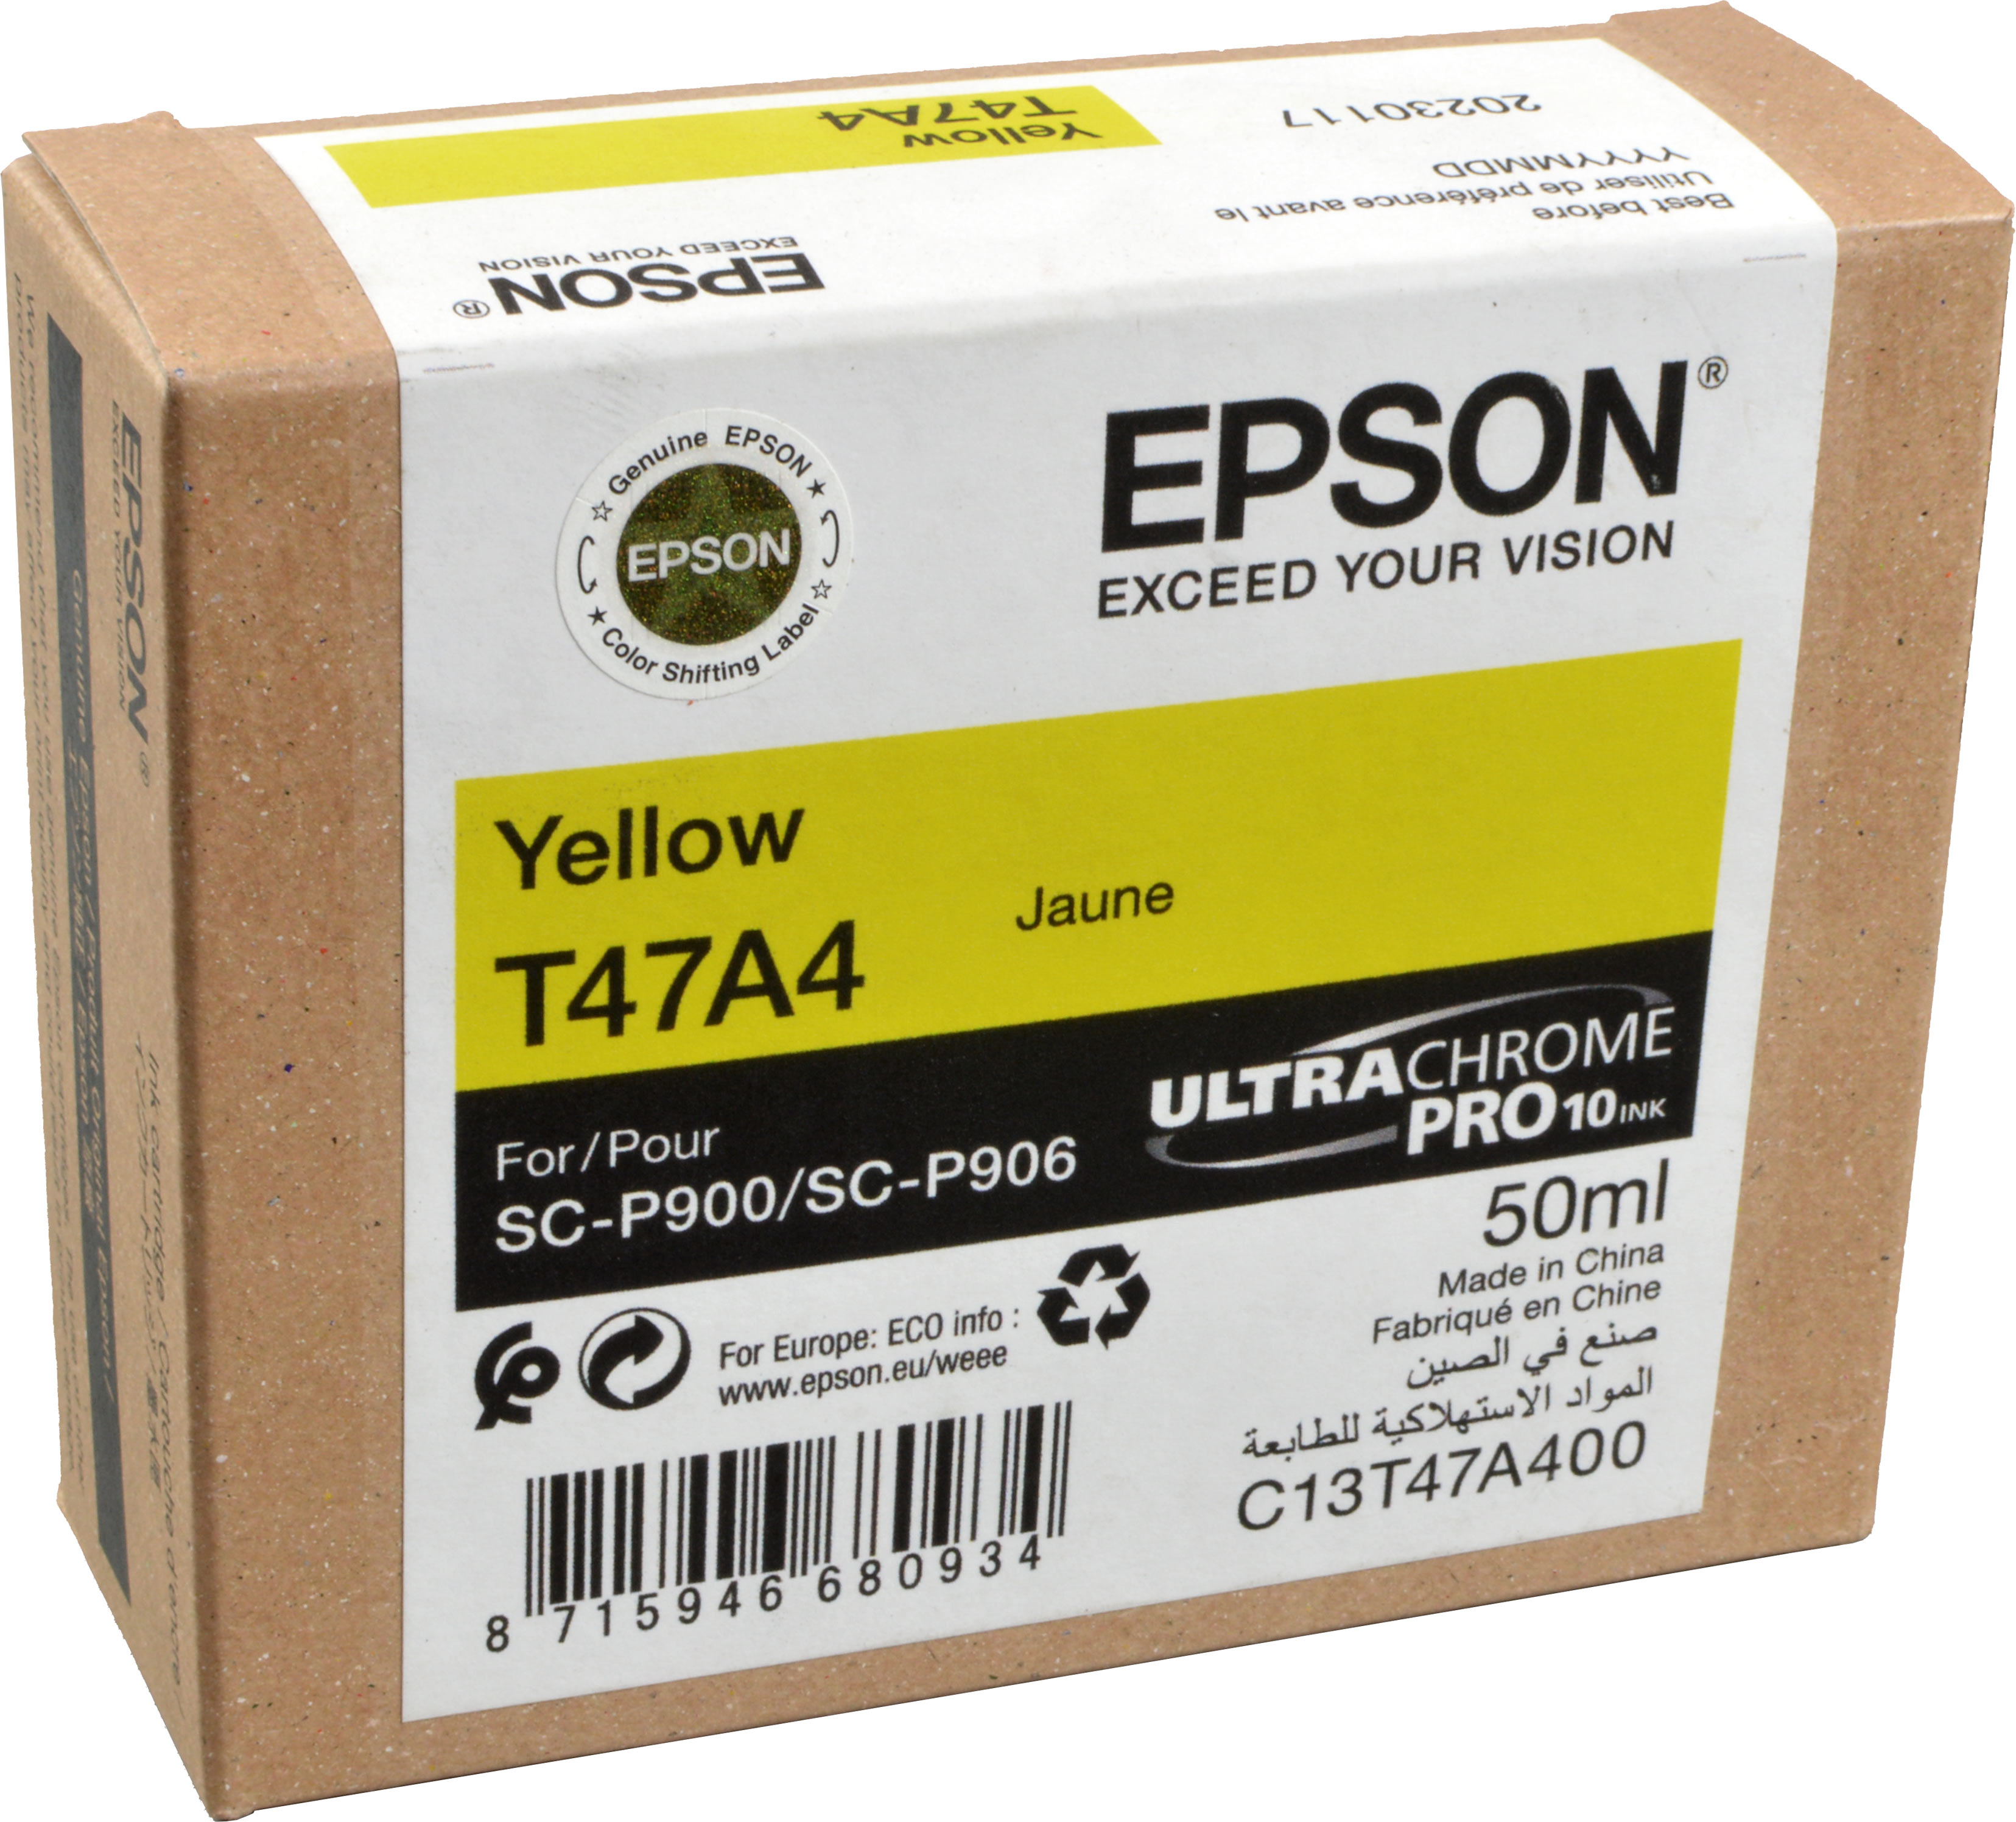 Epson Tinte C13T47A400  T47A4  yellow